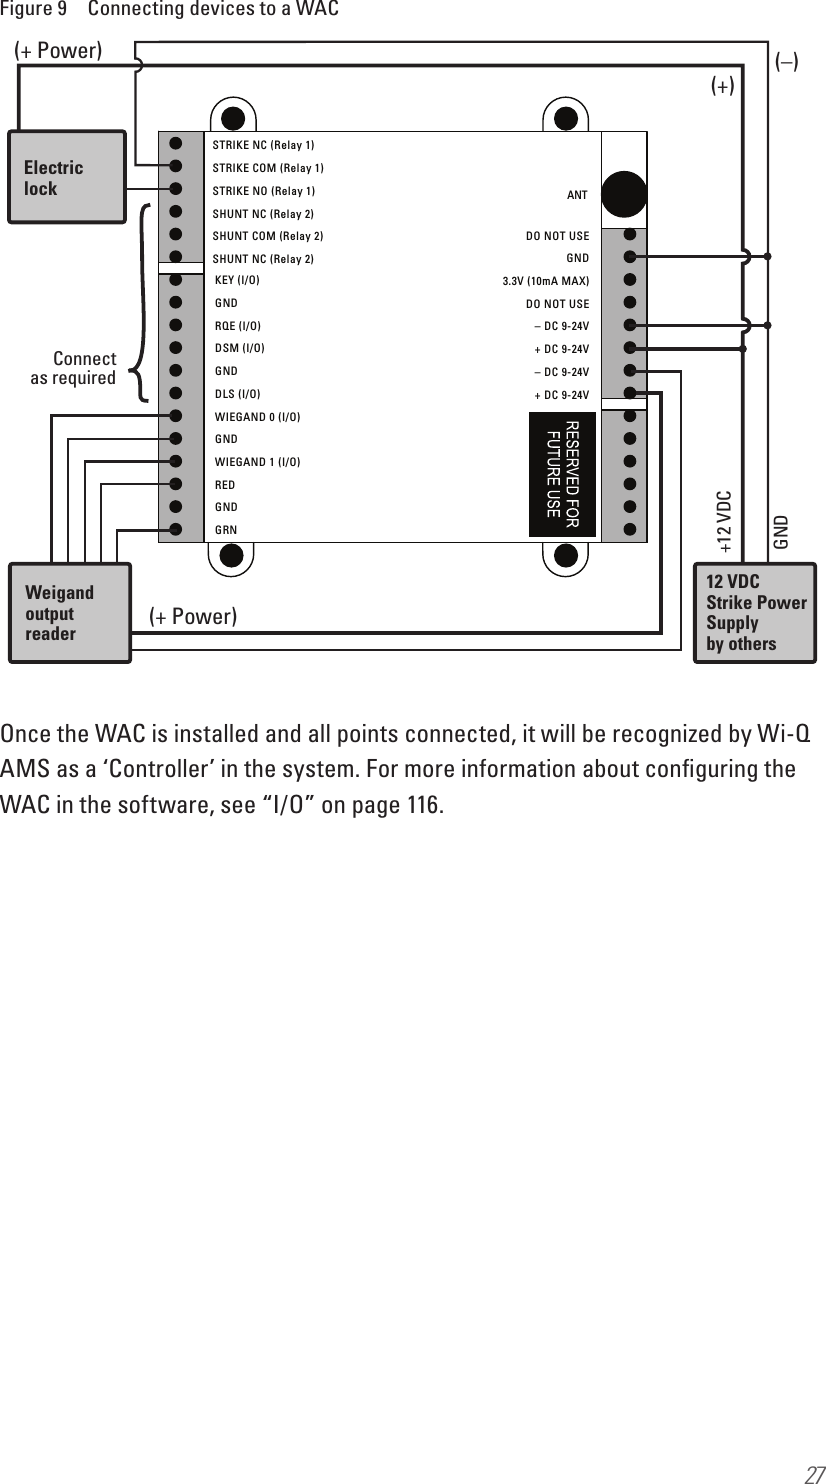 27Figure 9  Connecting devices to a WACOnce the WAC is installed and all points connected, it will be recognized by Wi-Q AMS as a ‘Controller’ in the system. For more information about conﬁguring the WAC in the software, see “I/O” on page 116.Weigandoutputreader12 VDCStrike PowerSupplyby othersSTRIKE NC (Relay 1)STRIKE COM (Relay 1)STRIKE NO (Relay 1)SHUNT NC (Relay 2)SHUNT COM (Relay 2)SHUNT NC (Relay 2)KEY (I/O)GNDRQE (I/O)DSM (I/O)GNDDLS (I/O)WIEGAND 0 (I/O)GNDWIEGAND 1 (I/O)REDGNDGRNANTDO NOT USEGND3.3V (10mA MAX)DO NOT USE– DC 9-24V+ DC 9-24V– DC 9-24V+ DC 9-24V+12 VDCConnectas requiredGND(–)(+)(+ Power)(+ Power)Electriclock